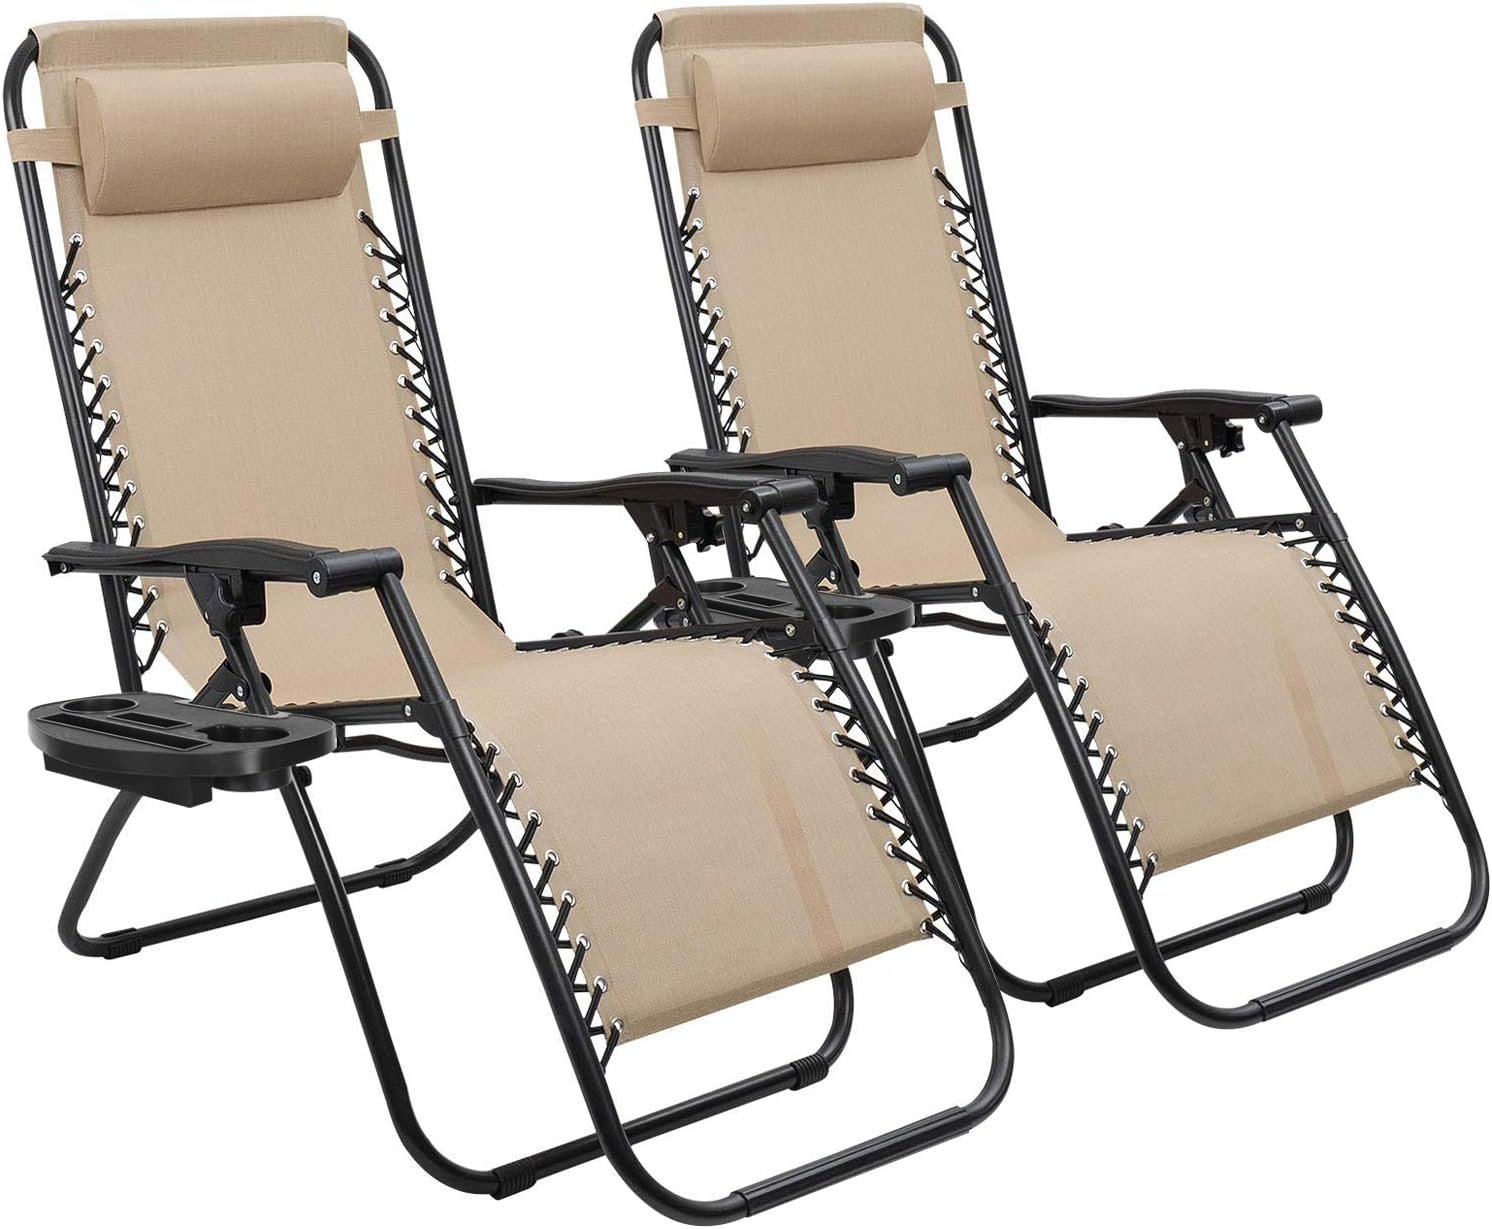 Devoko Patio Zero Gravity Chair Outdoor Folding Adjustable Reclining Chairs Pool Side Using Lawn Lounge Chair with Pillow Set of 2 (Beige) Review